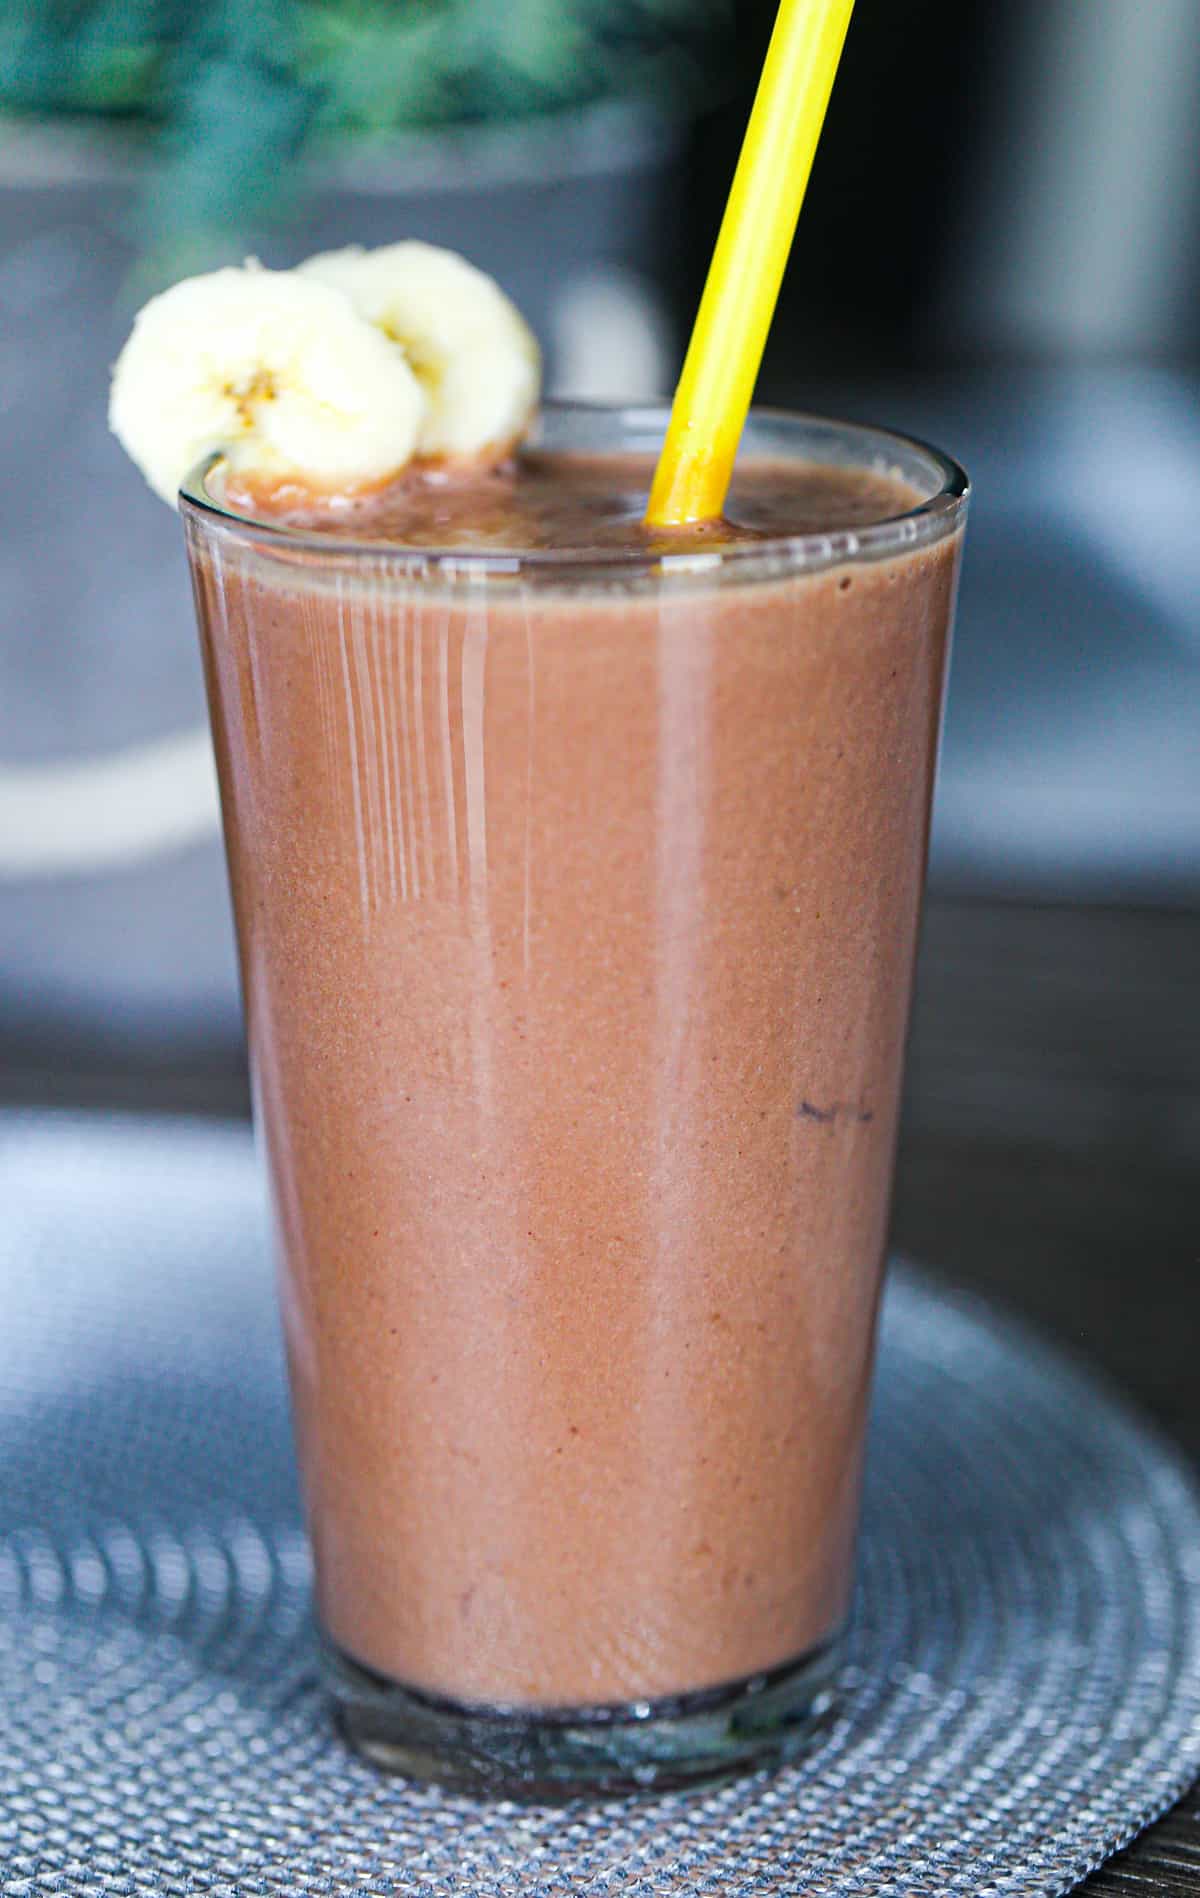 Chocolate Almond Butter Banana Smoothie